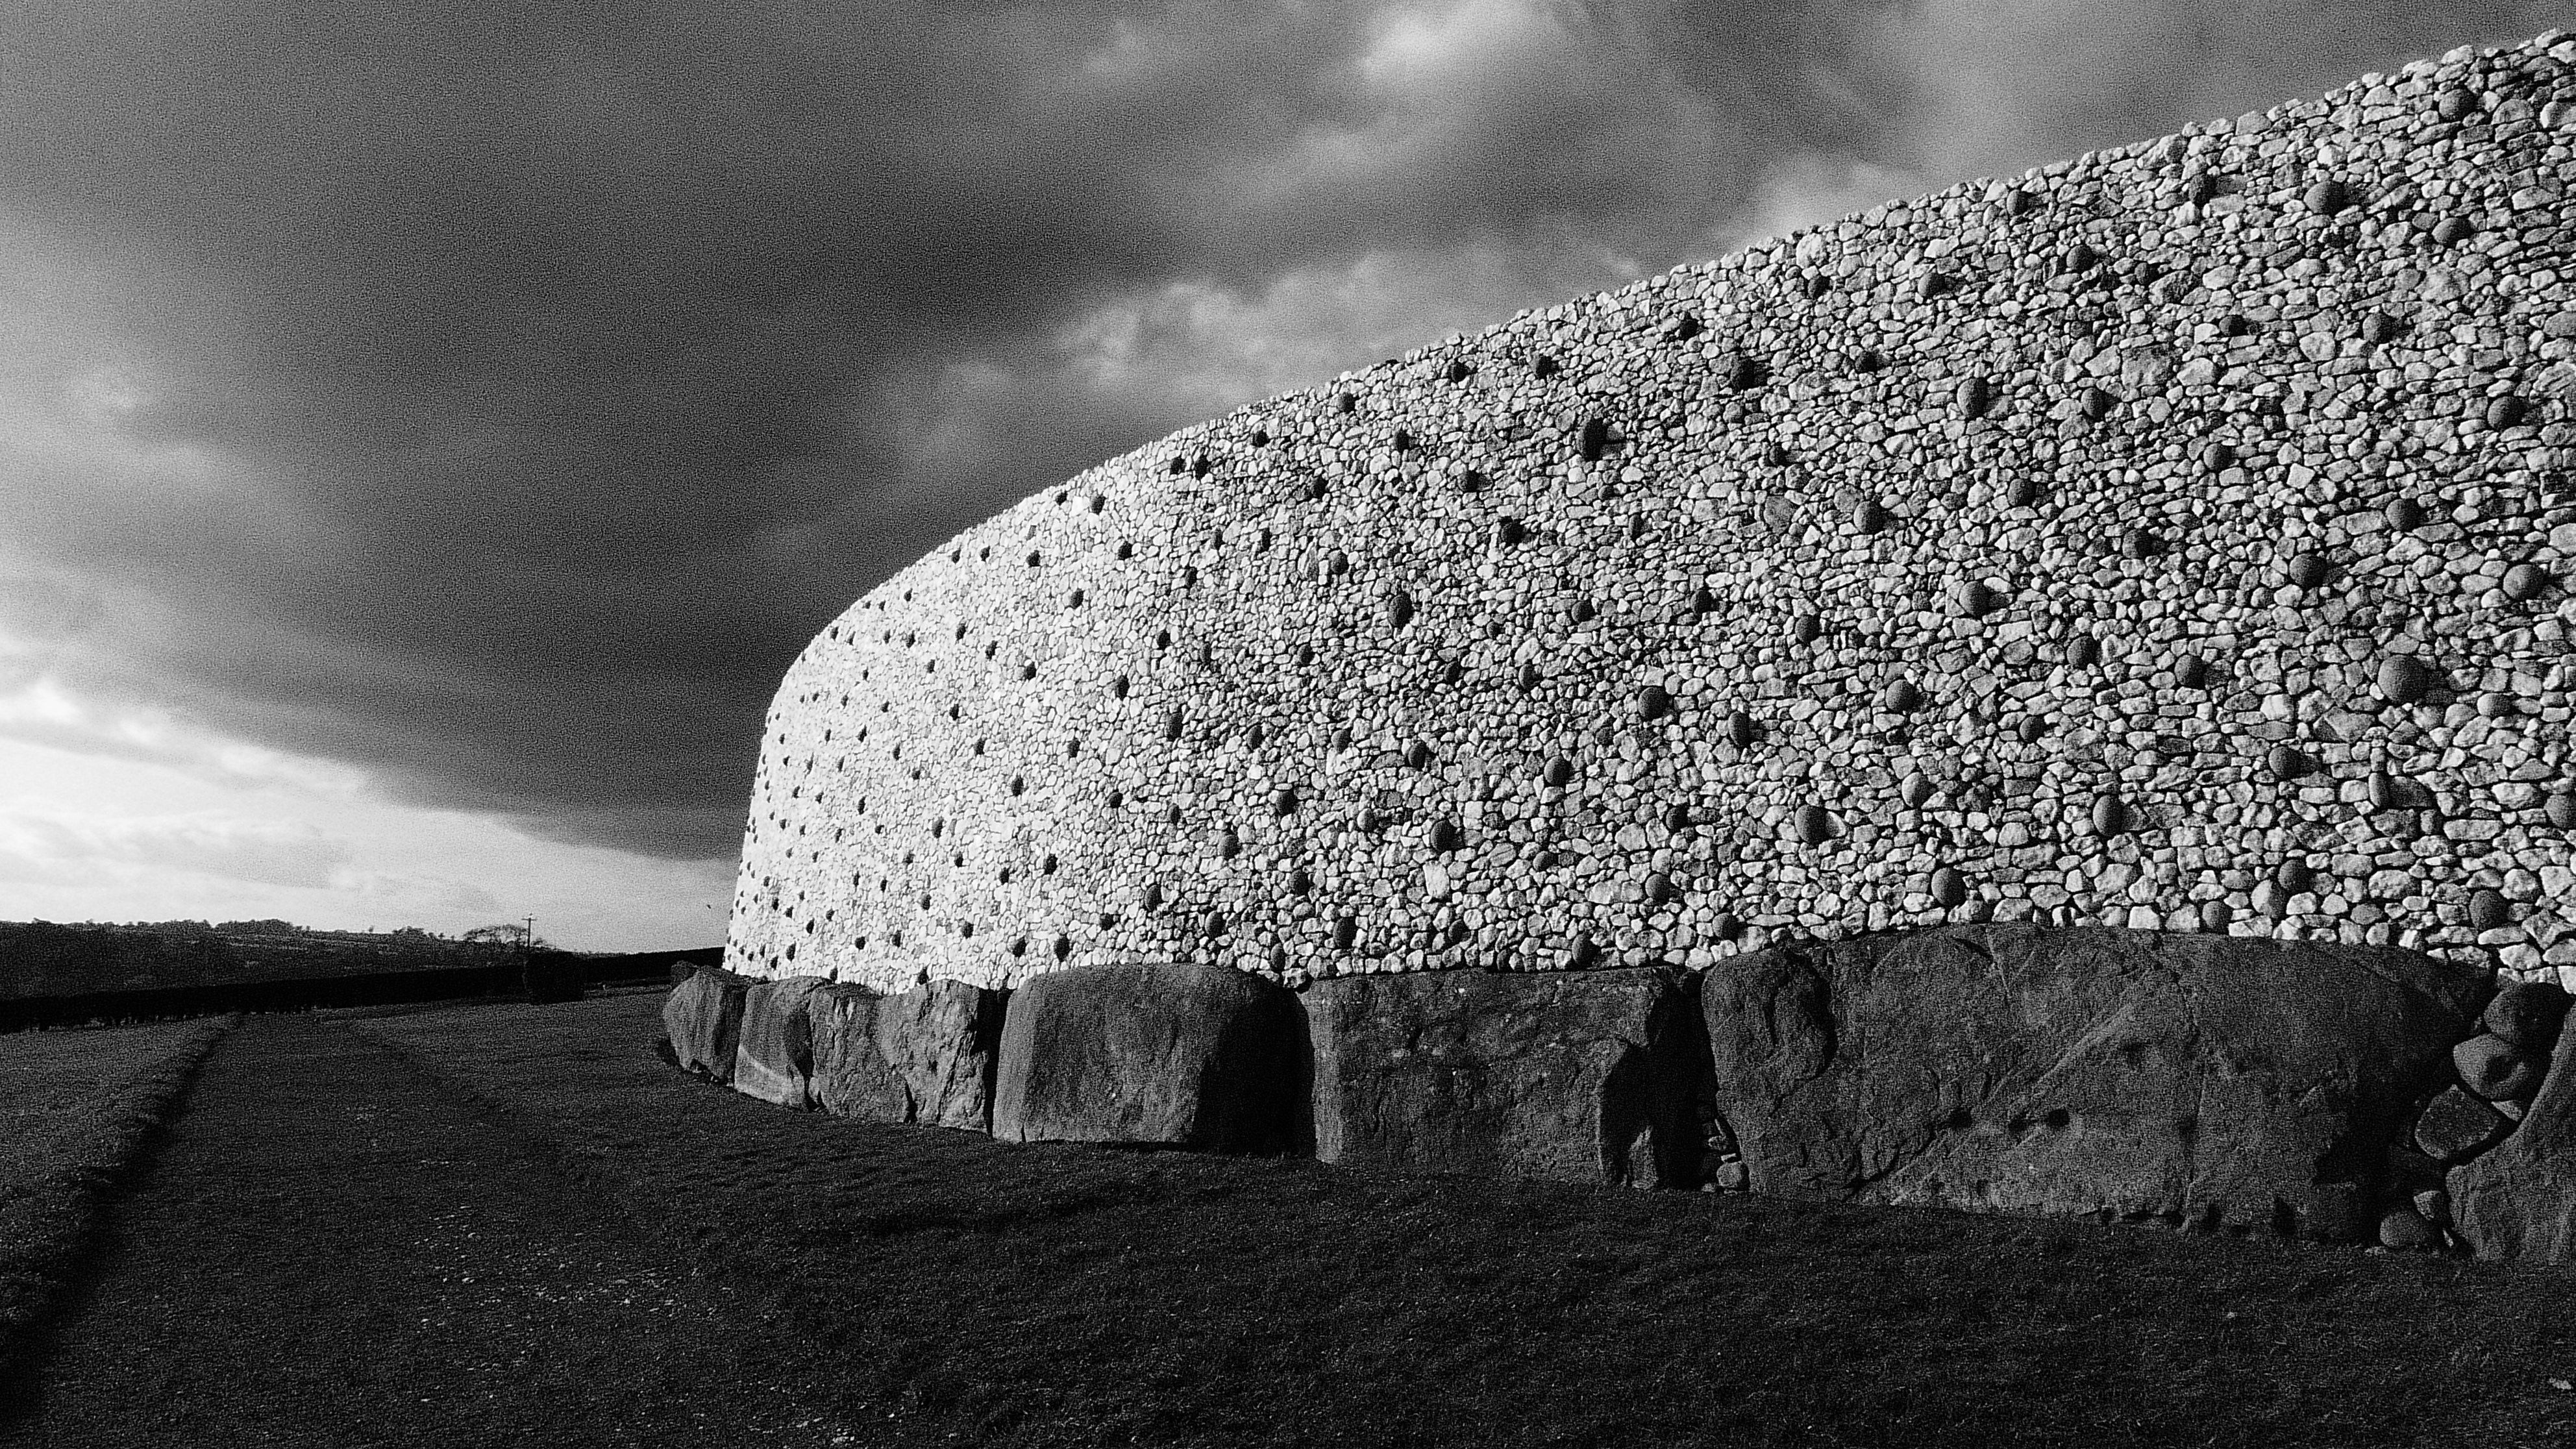 Newgrange Reconstructed Facade. Photo by Patsy Wooters.